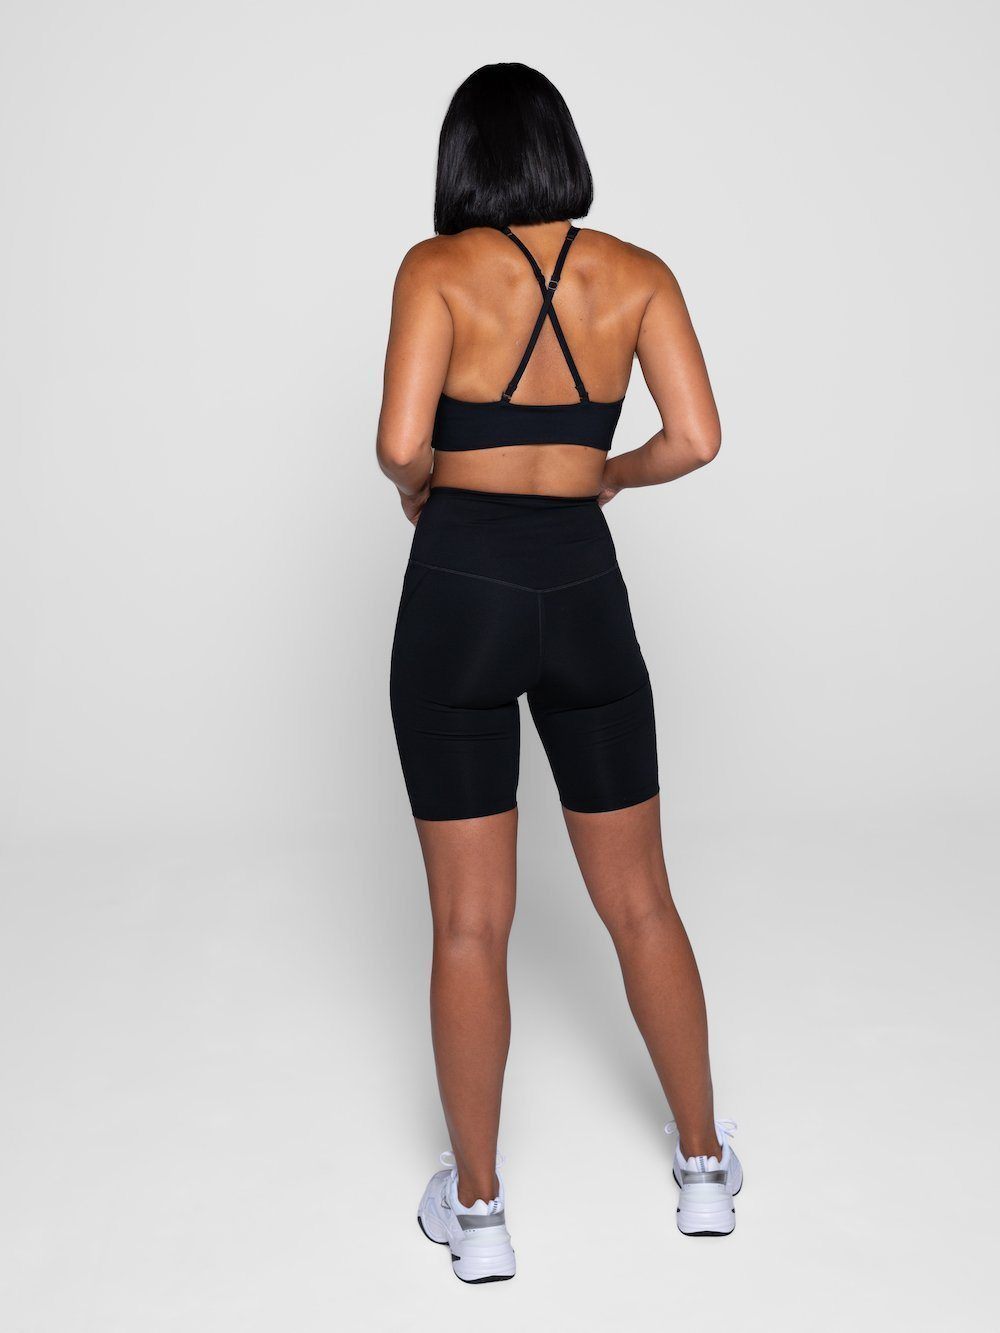 Girlfriend Collective Topanga sports Bra - Made from recycled plastic bottles Black Underwear